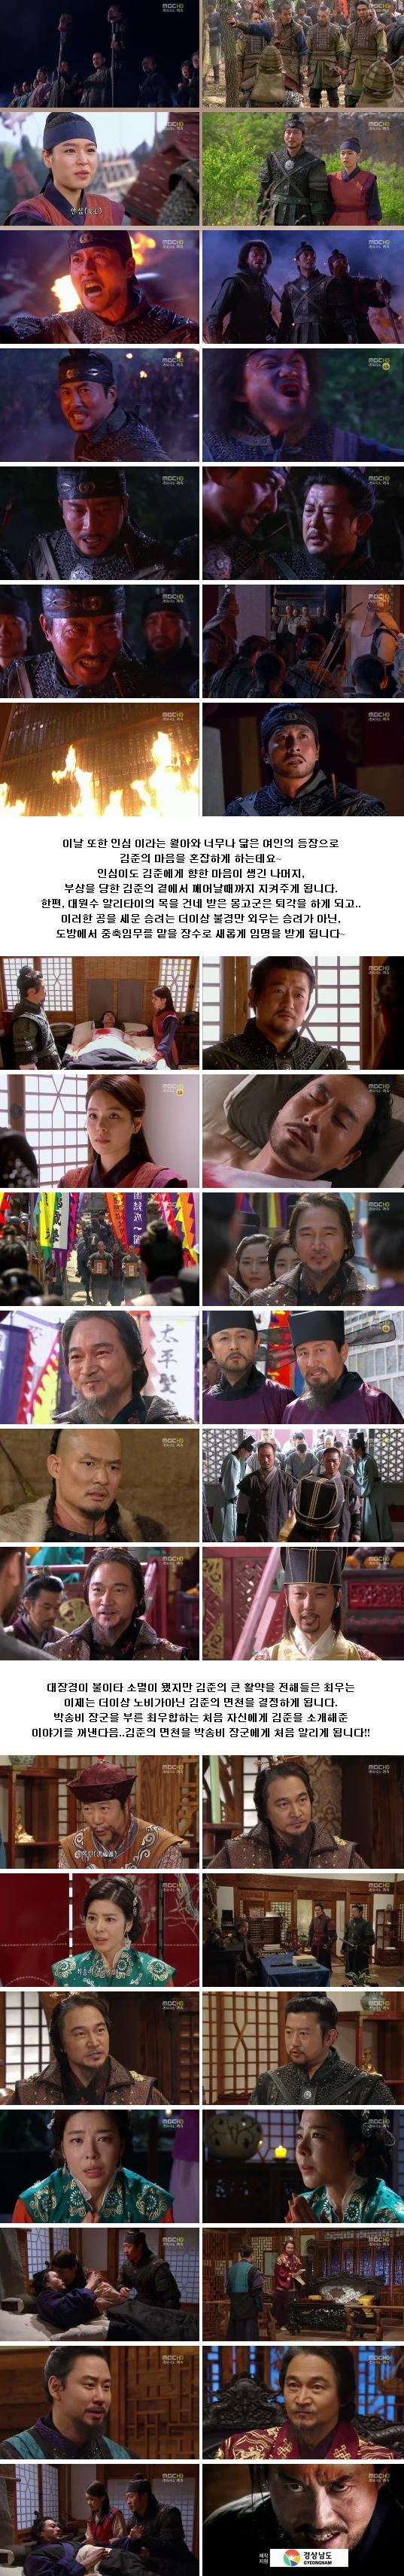 episodes 29 and 30 captures for the Korean drama 'God of War'